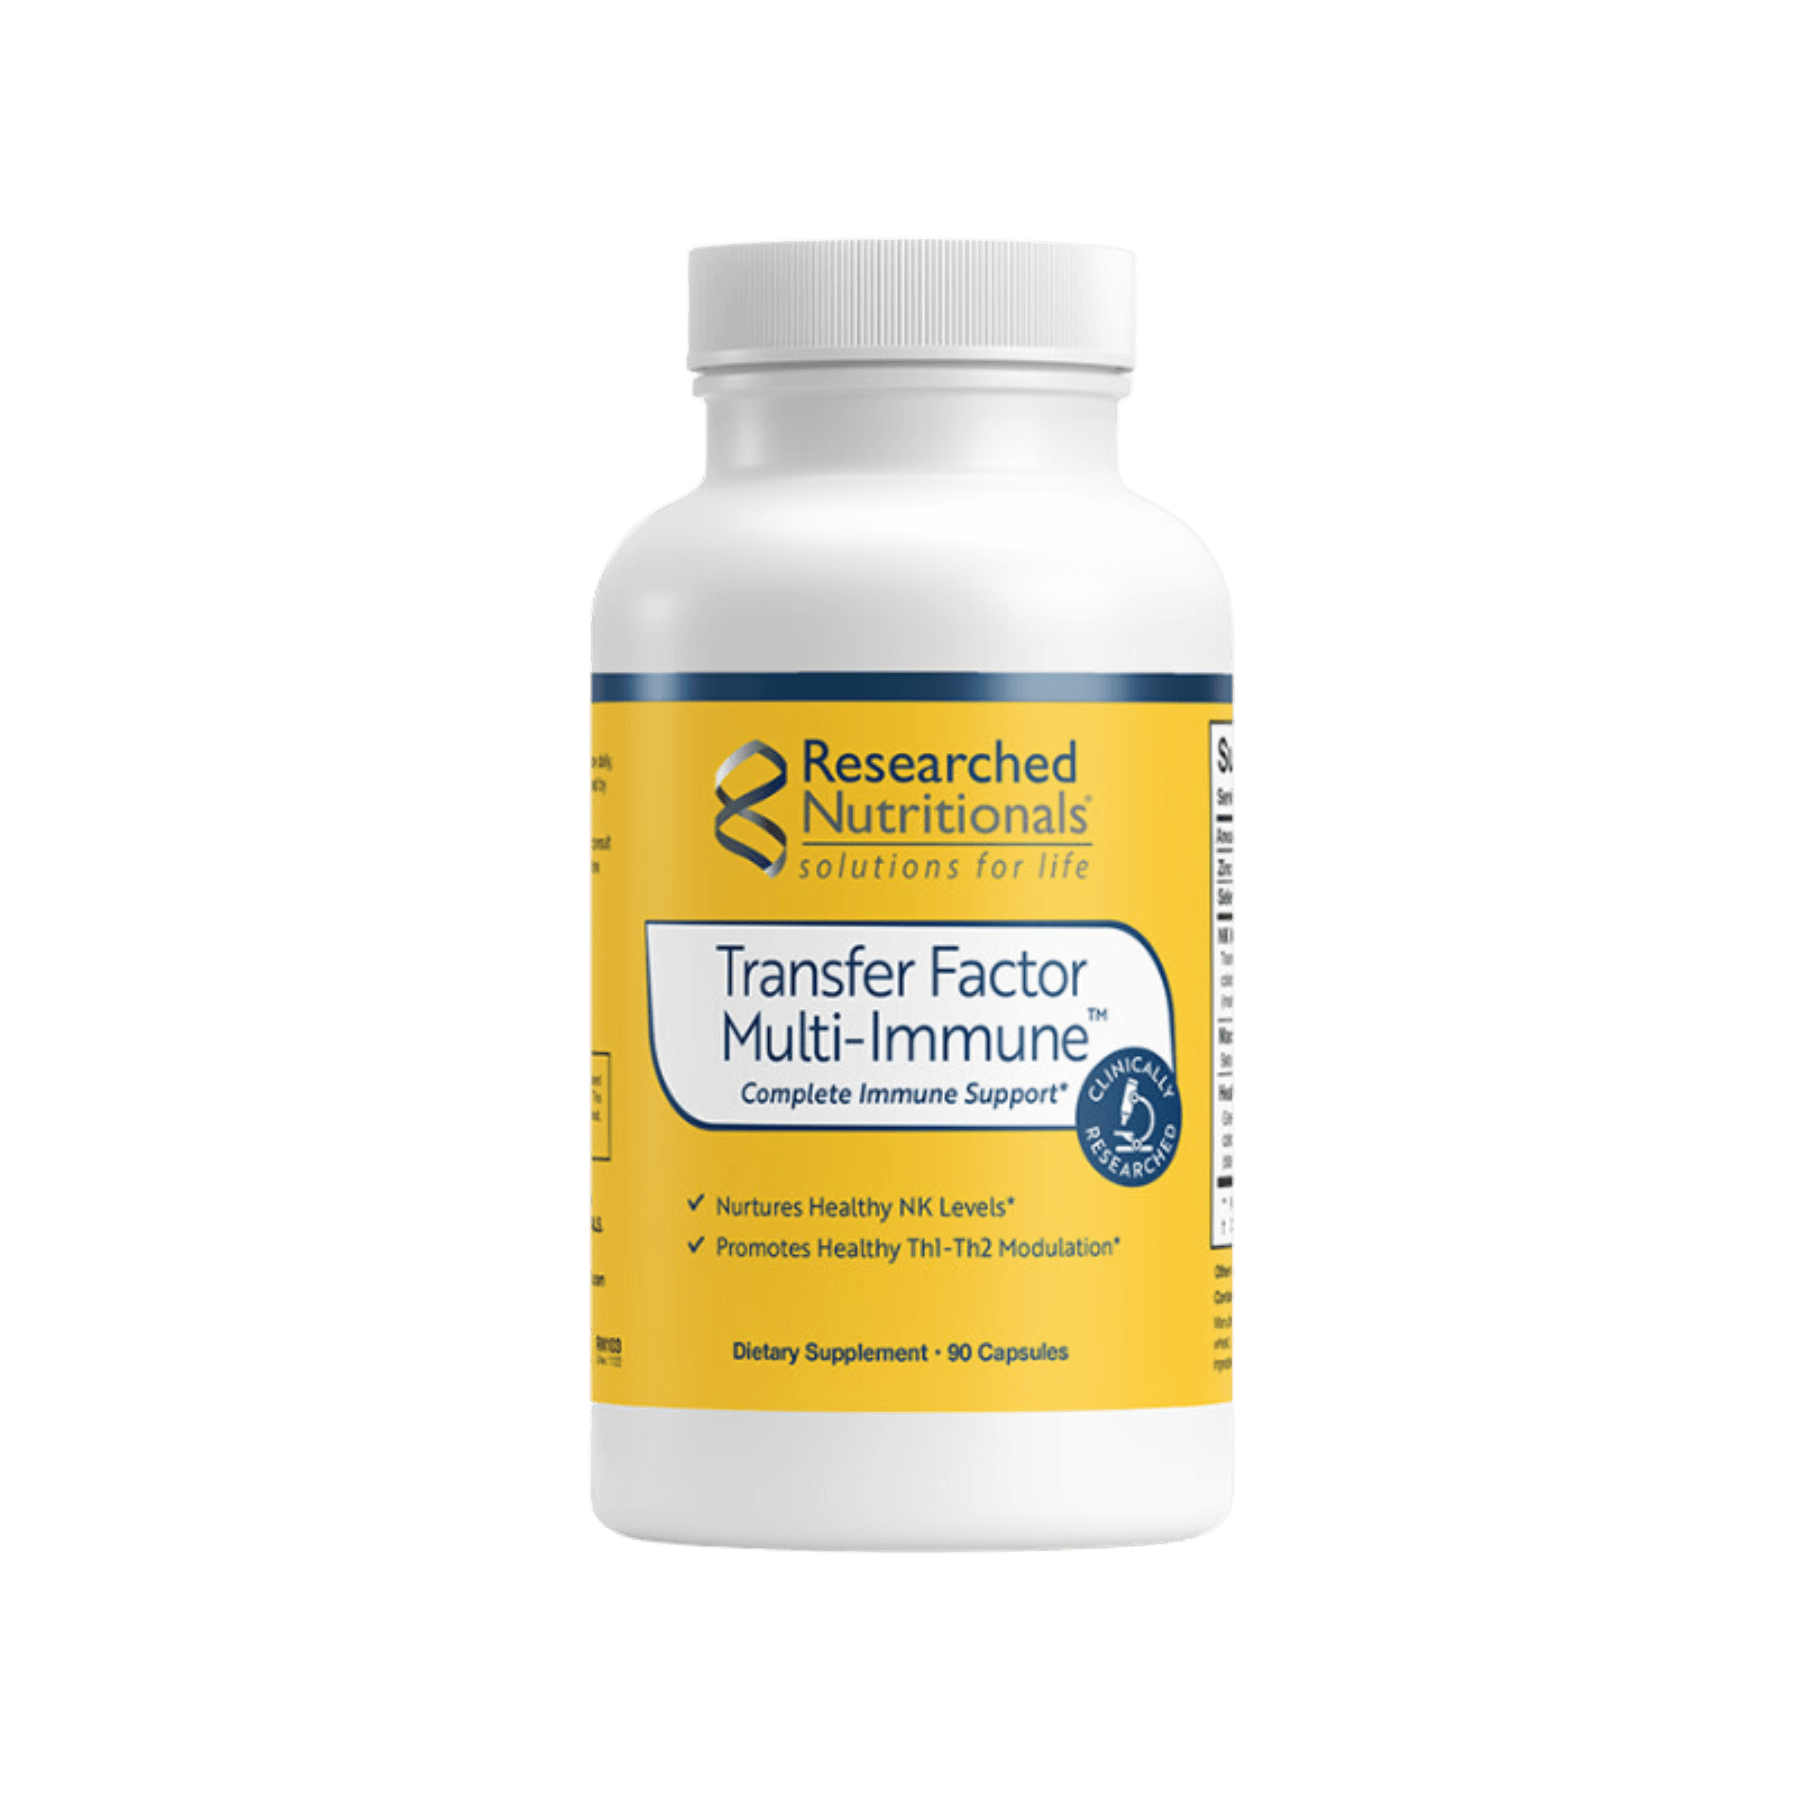 Researched Nutritionals Transfer Factor Capsules